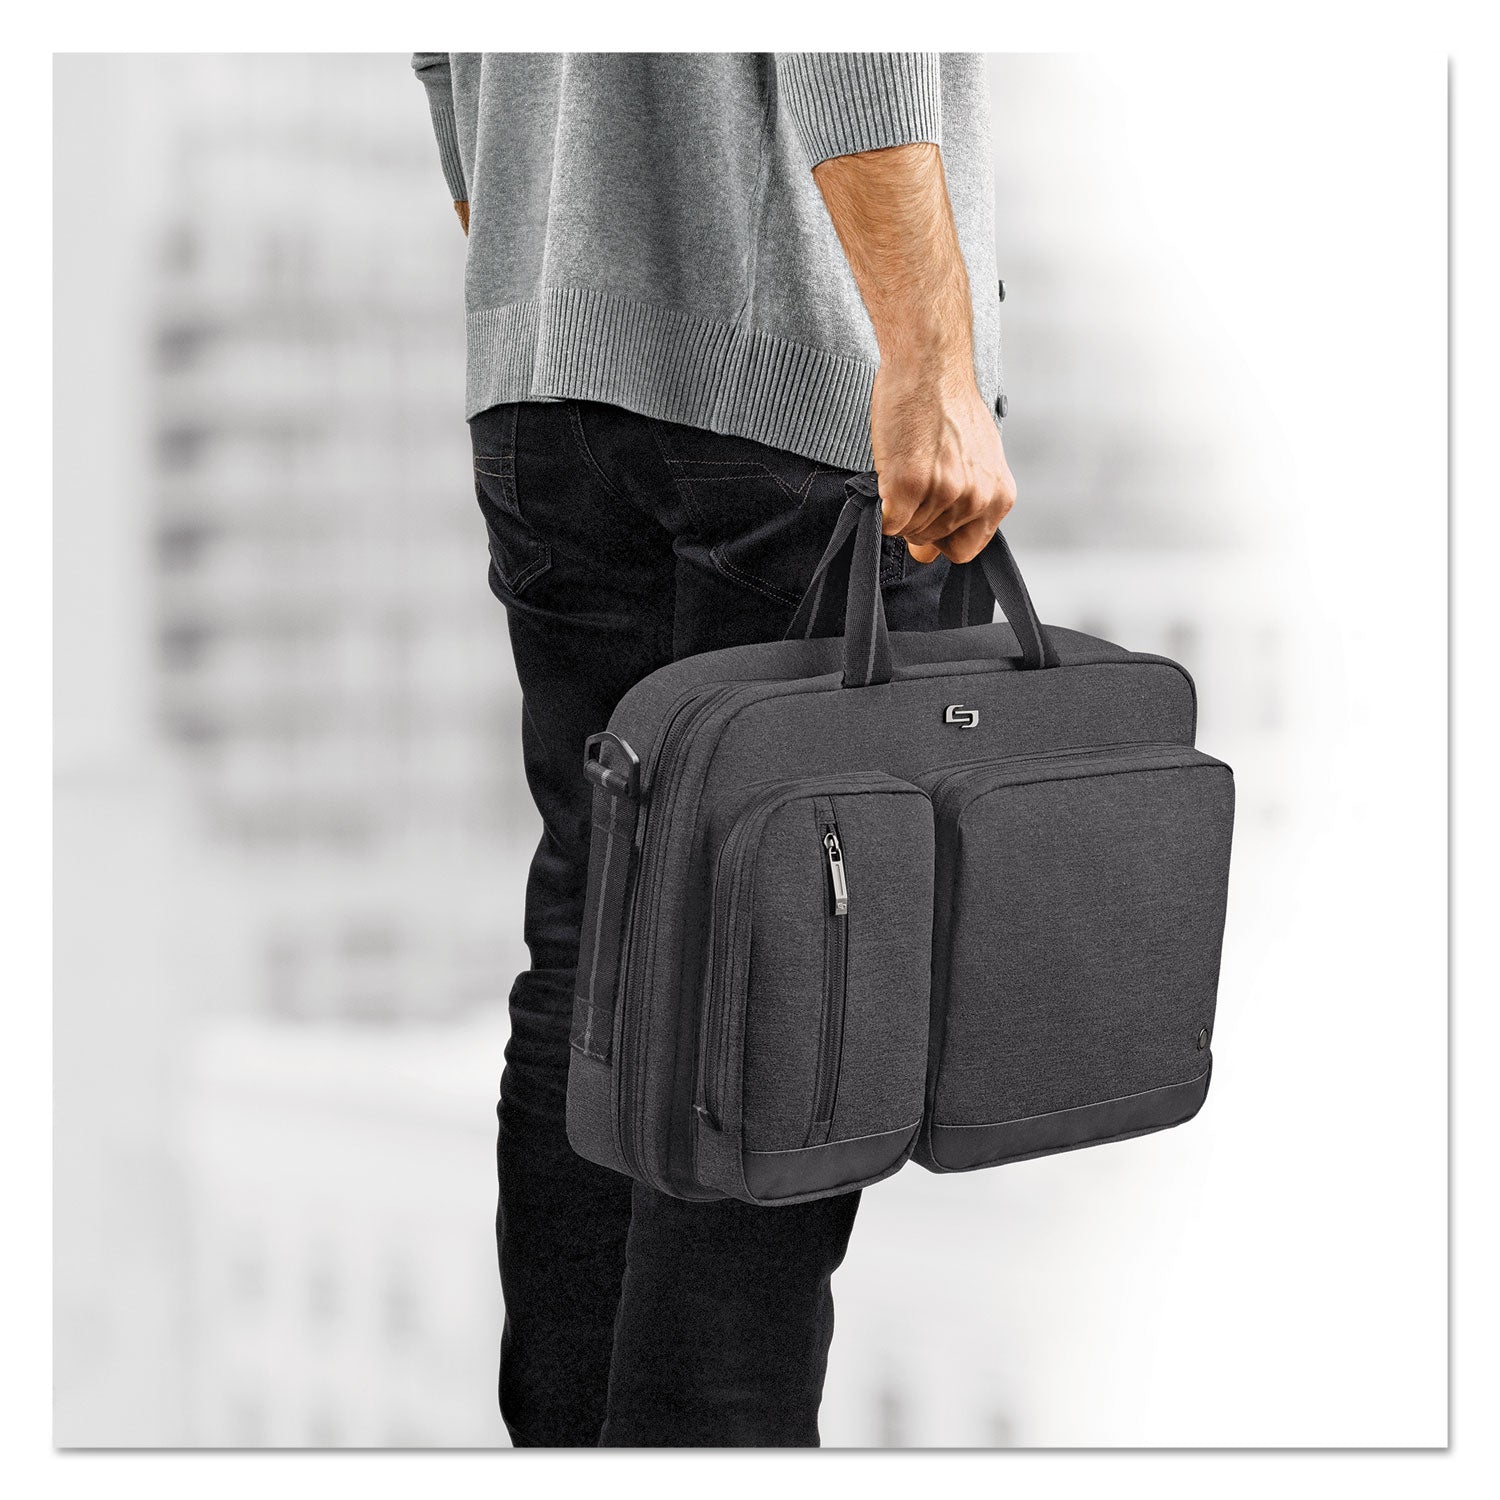 urban-hybrid-briefcase-fits-devices-up-to-156-polyester-1675-x-4-x-12-gray_uslubn31010 - 5